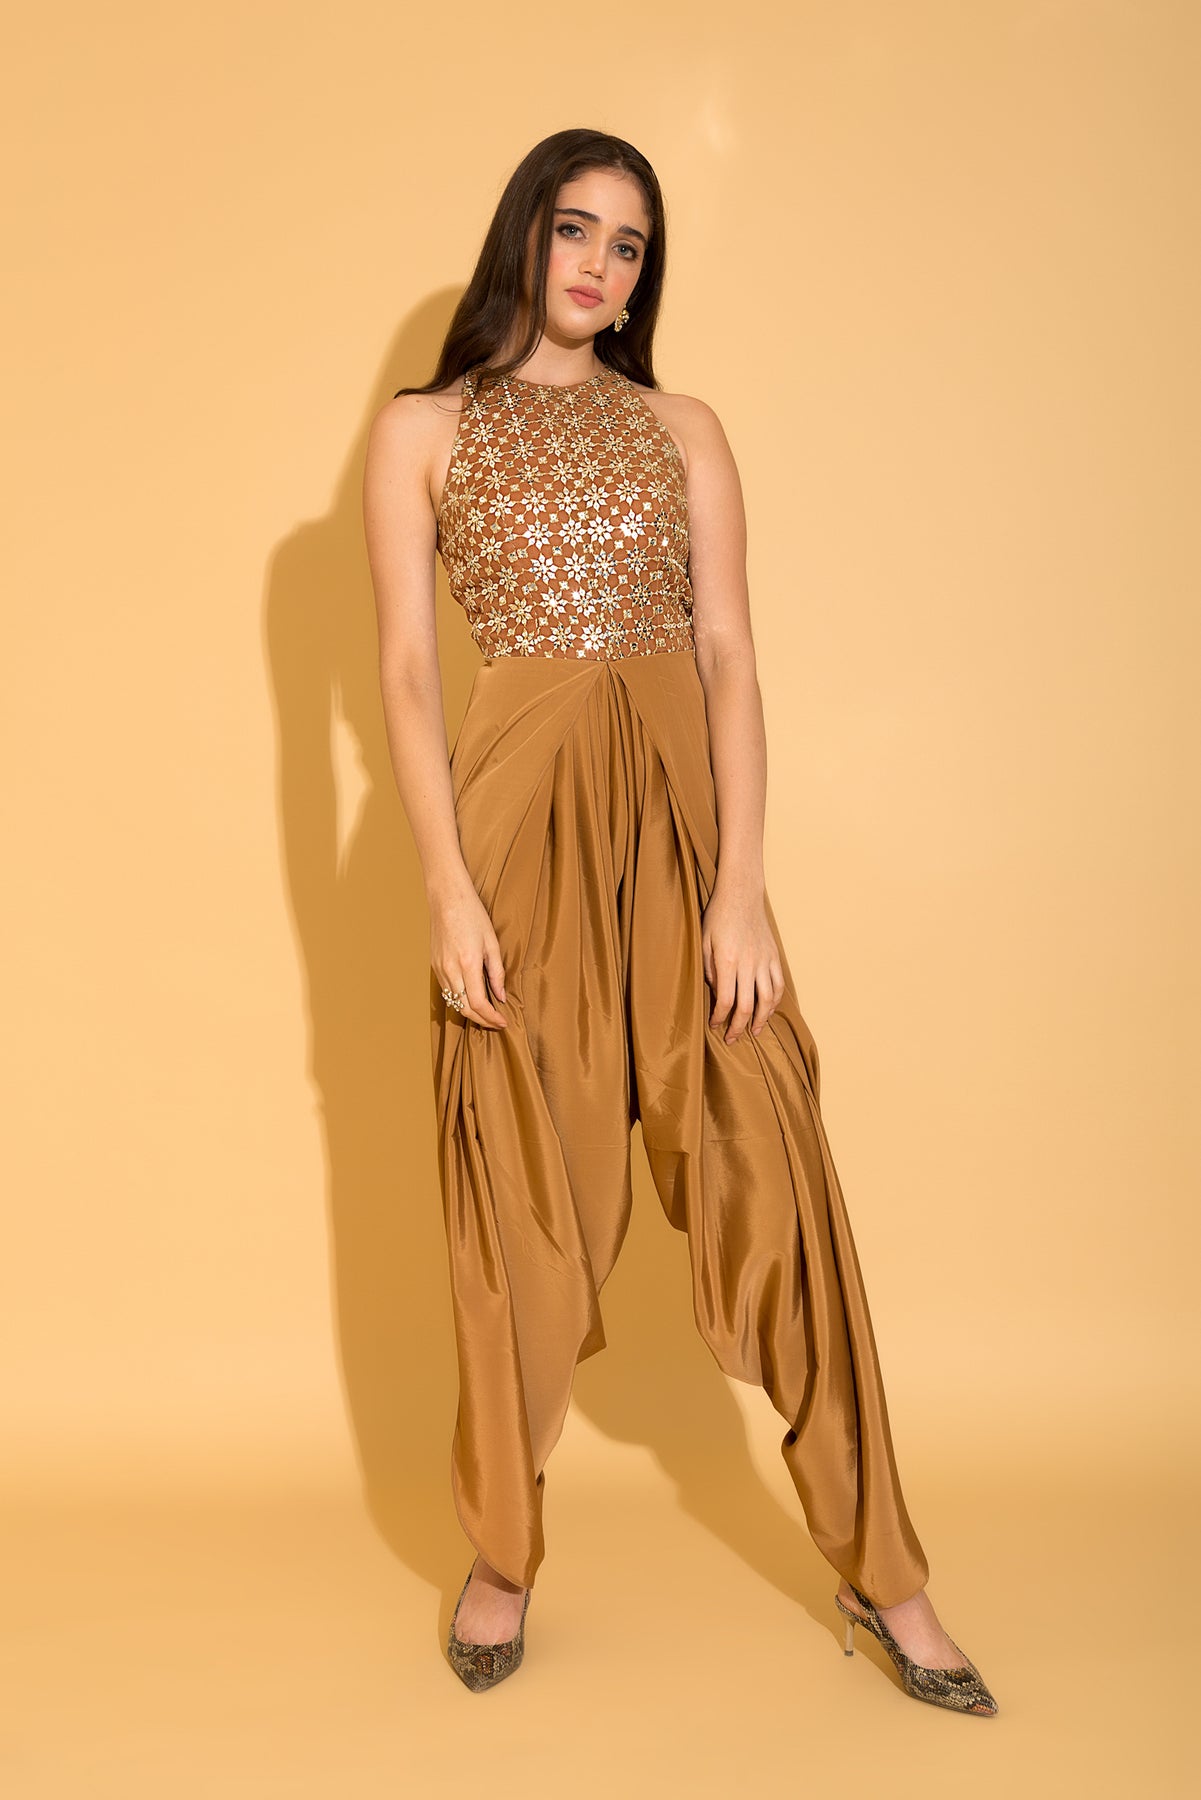 Stylish Indo Western Outfit Ideas for a Trendy Fusion Look | Libas